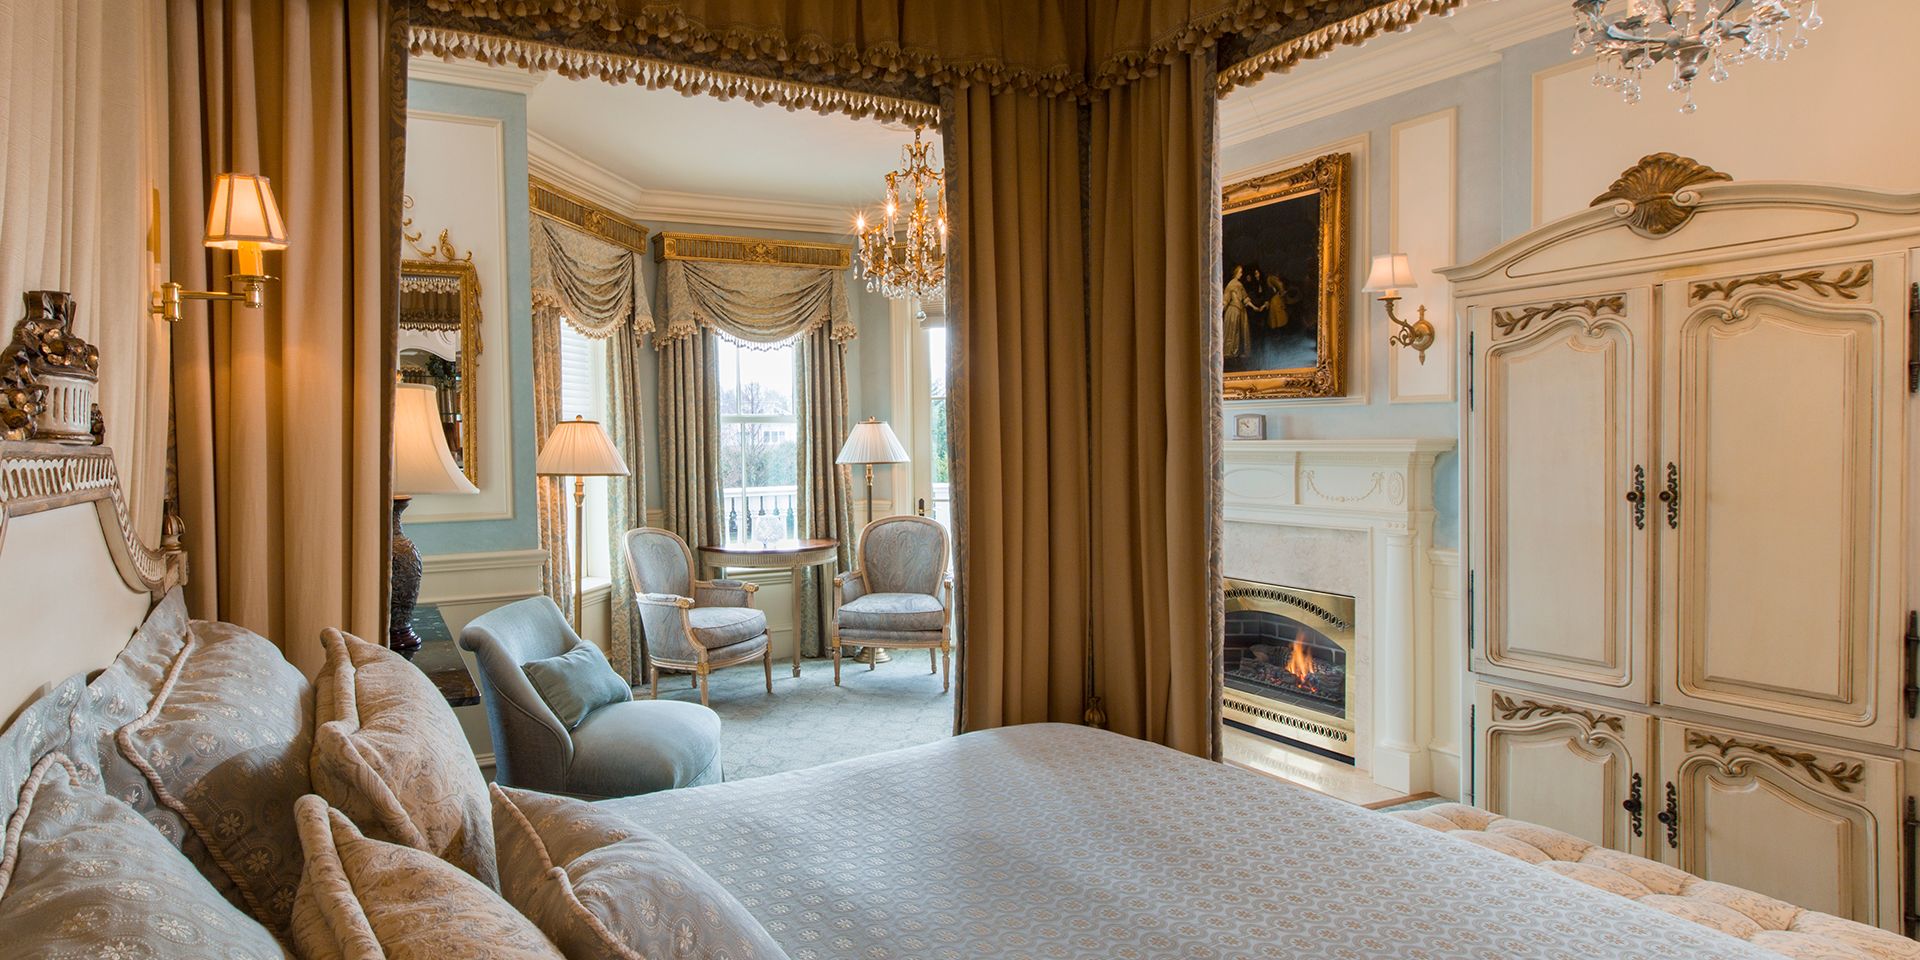 The Chanler's 20 unique guest rooms like our Louis XVI guest room allows guests to create a customized itinerary for their trip to Newport